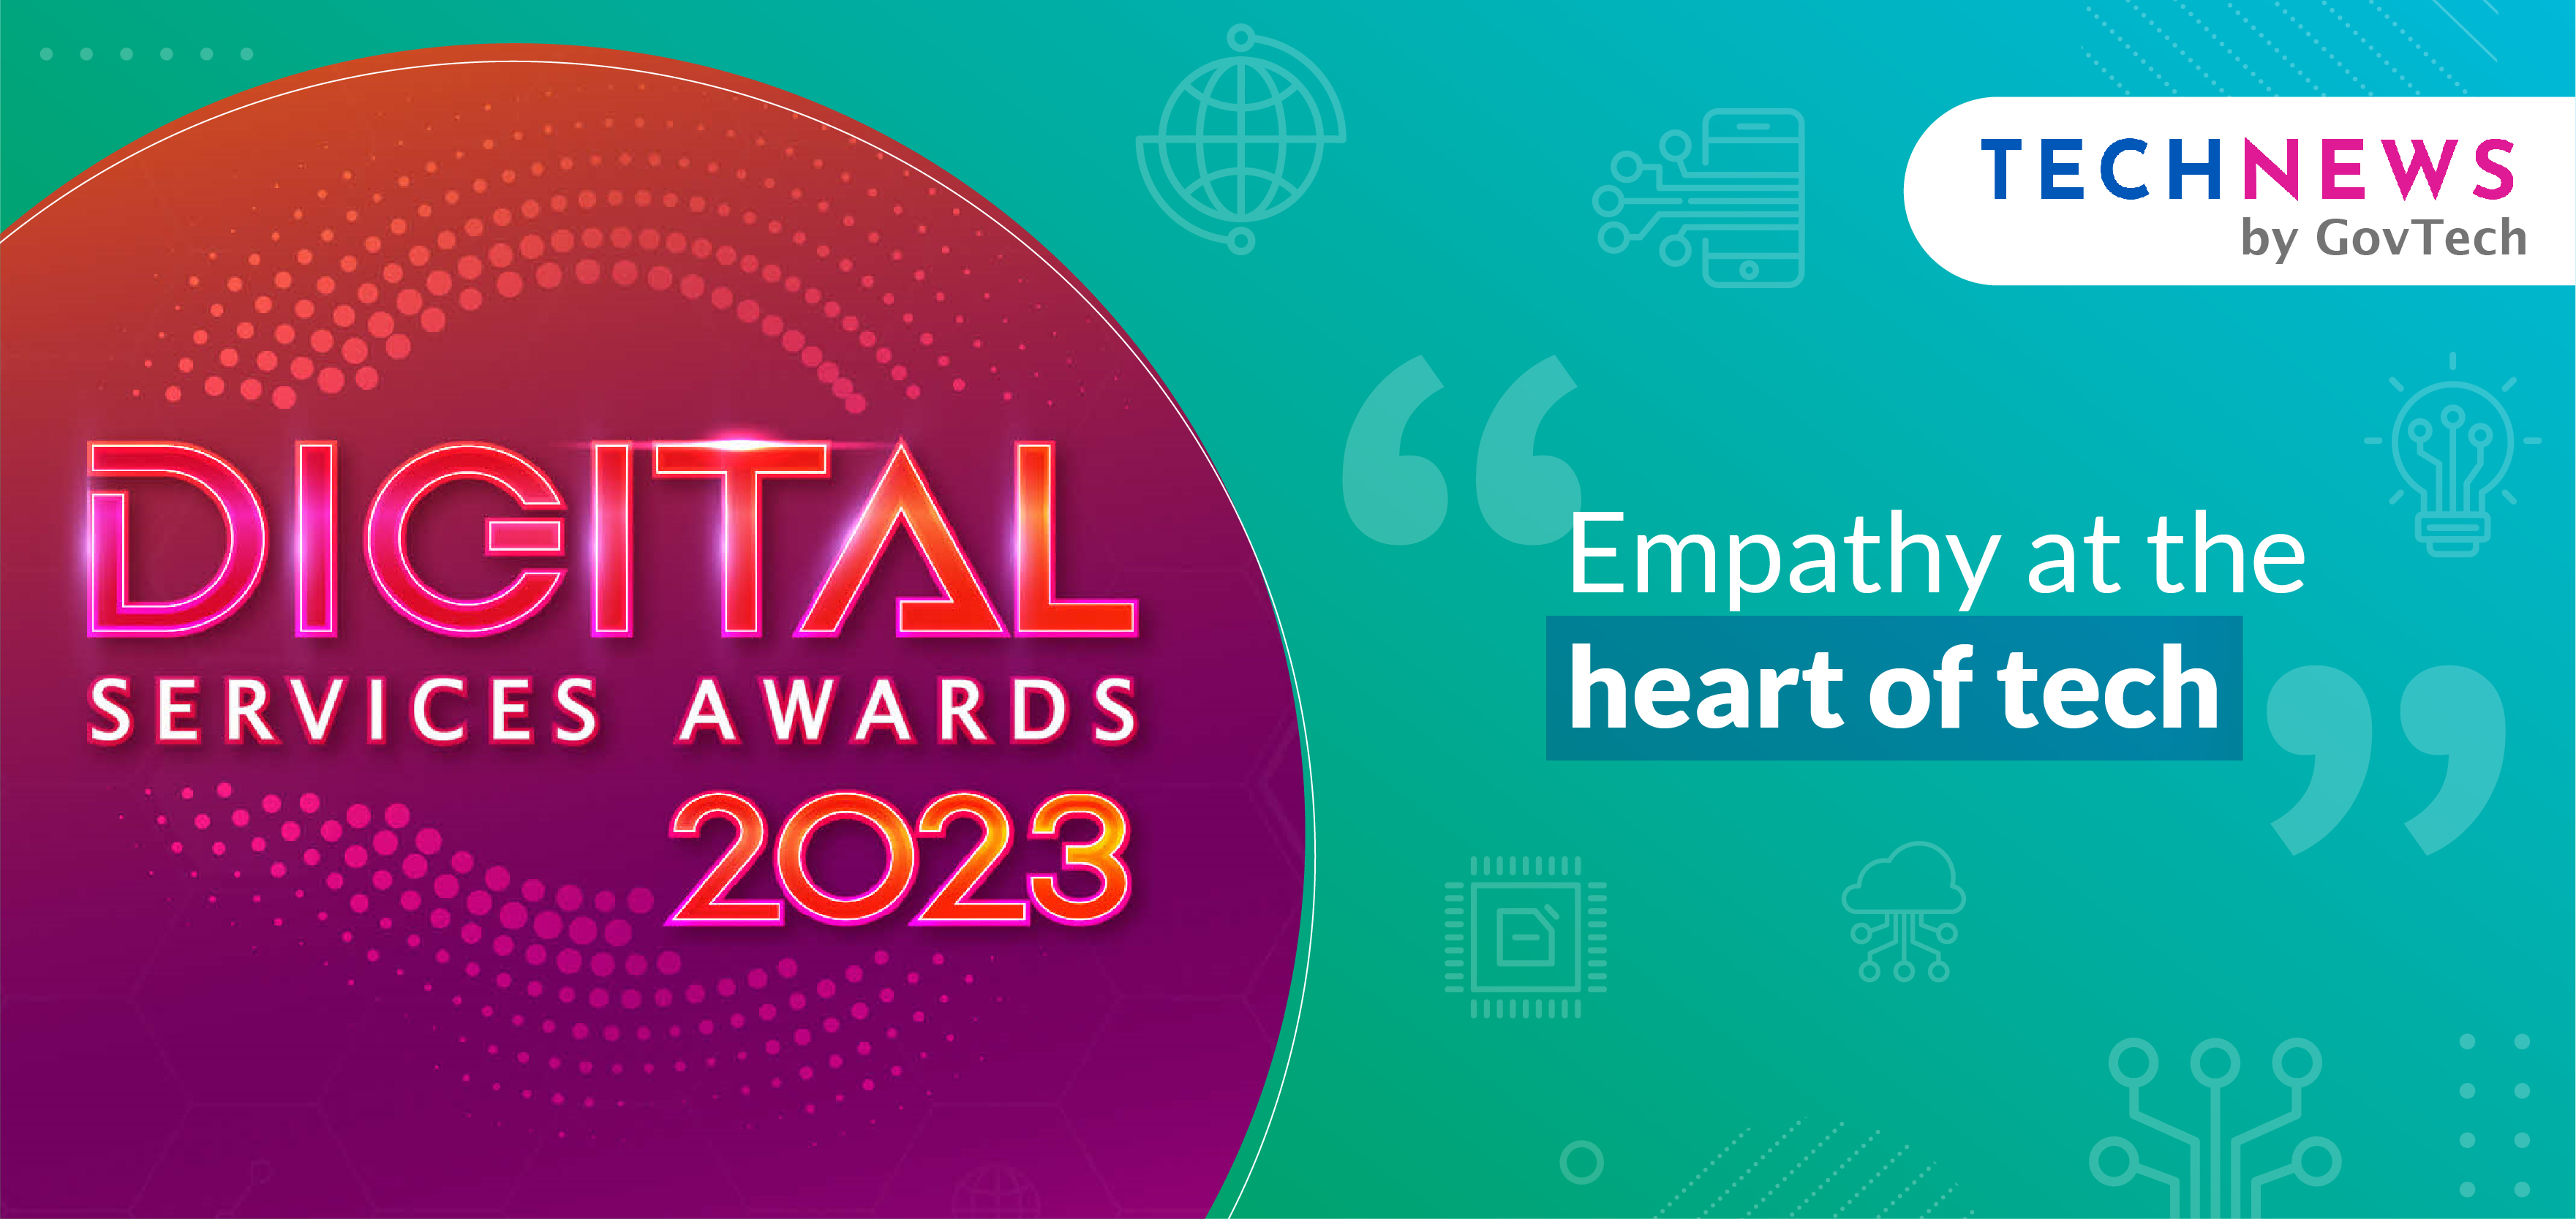 Happening on the 24th of November, the Digital Services Awards 2023